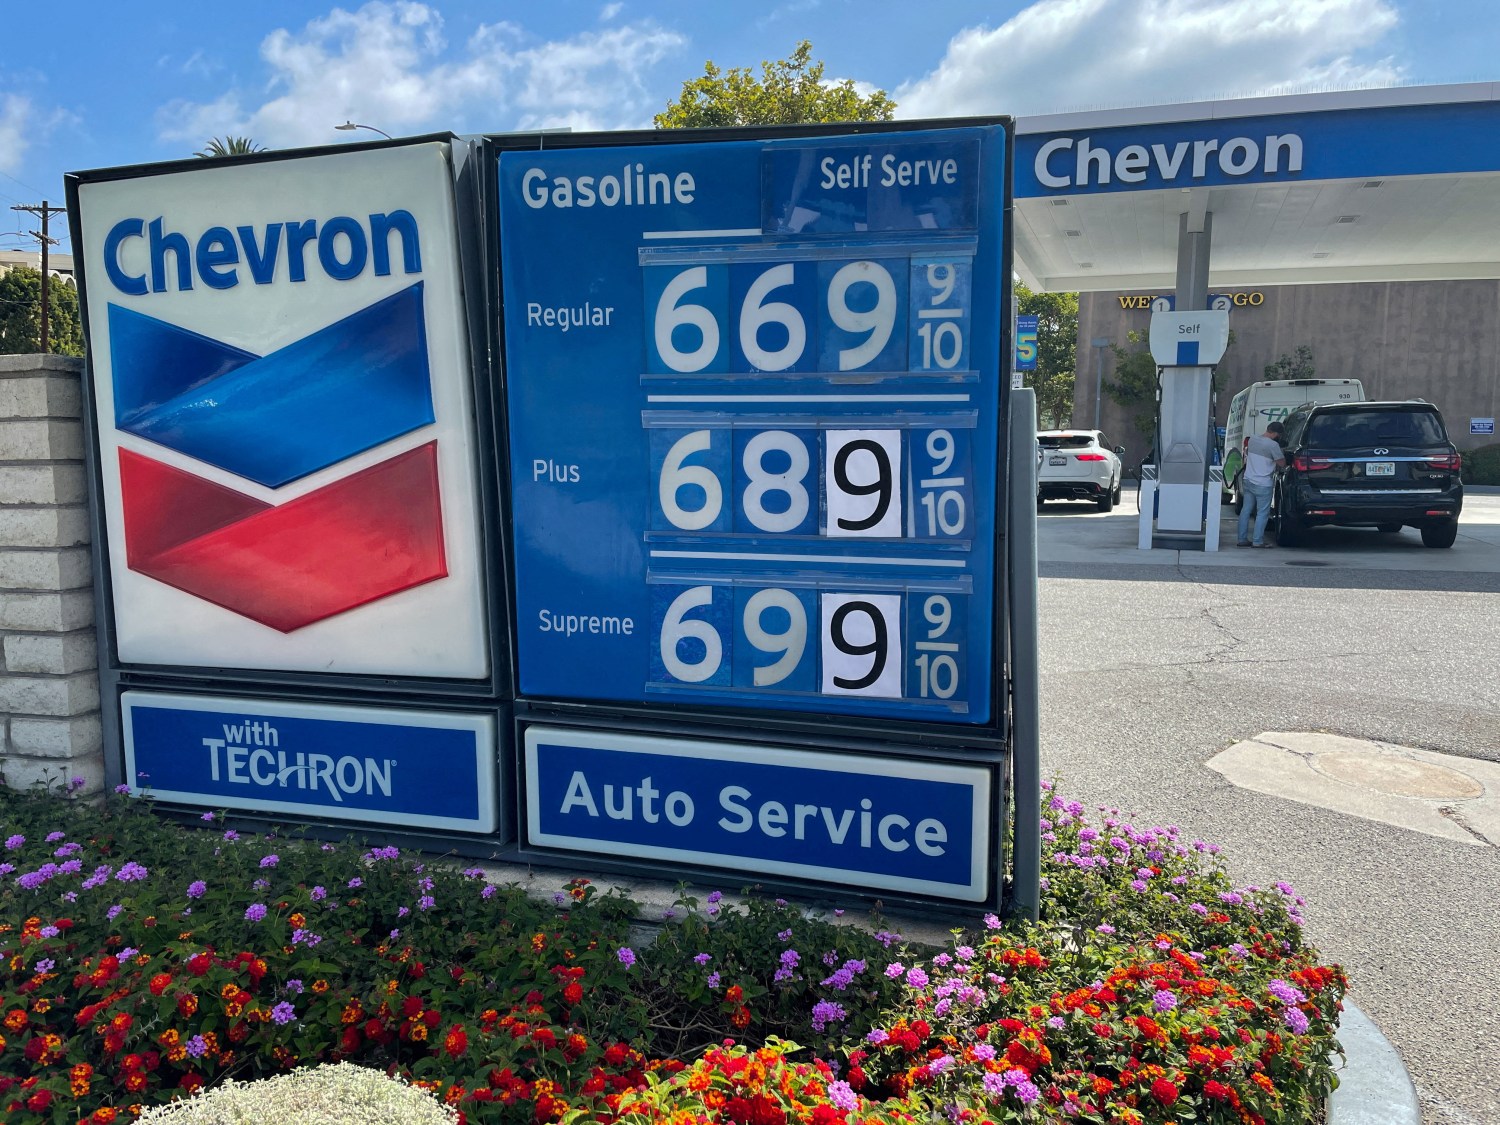 FILE PHOTO: Gas prices are advertised at a Chevron station as rising inflation and oil costs affect the consumers in Los Angeles, California, U.S., June 13, 2022. REUTERS/Lucy Nicholson/File Photo